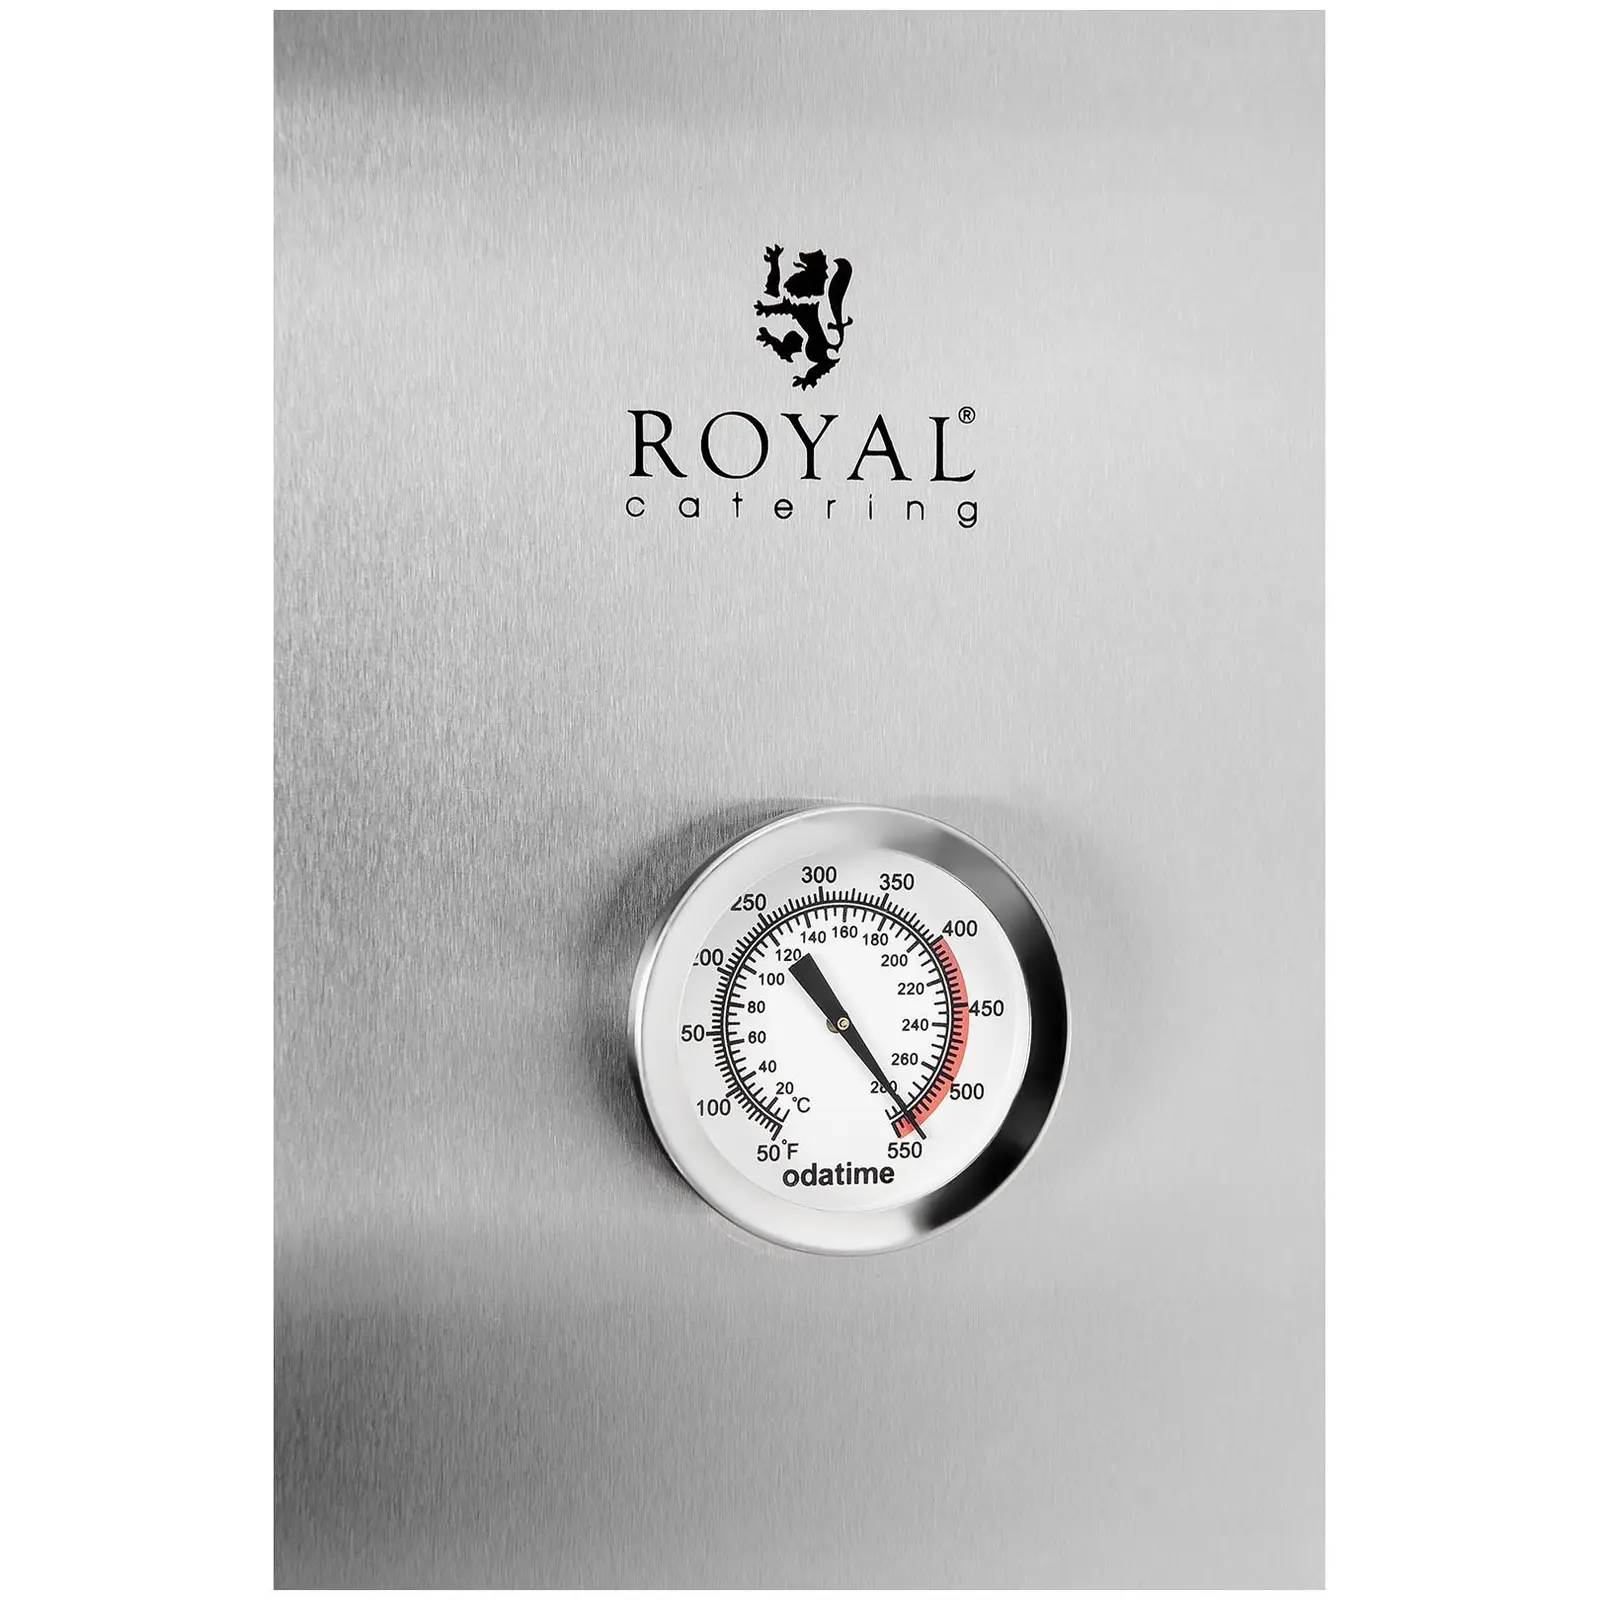 Forno affumicatore - 105 L - Royal Catering - 4 griglie